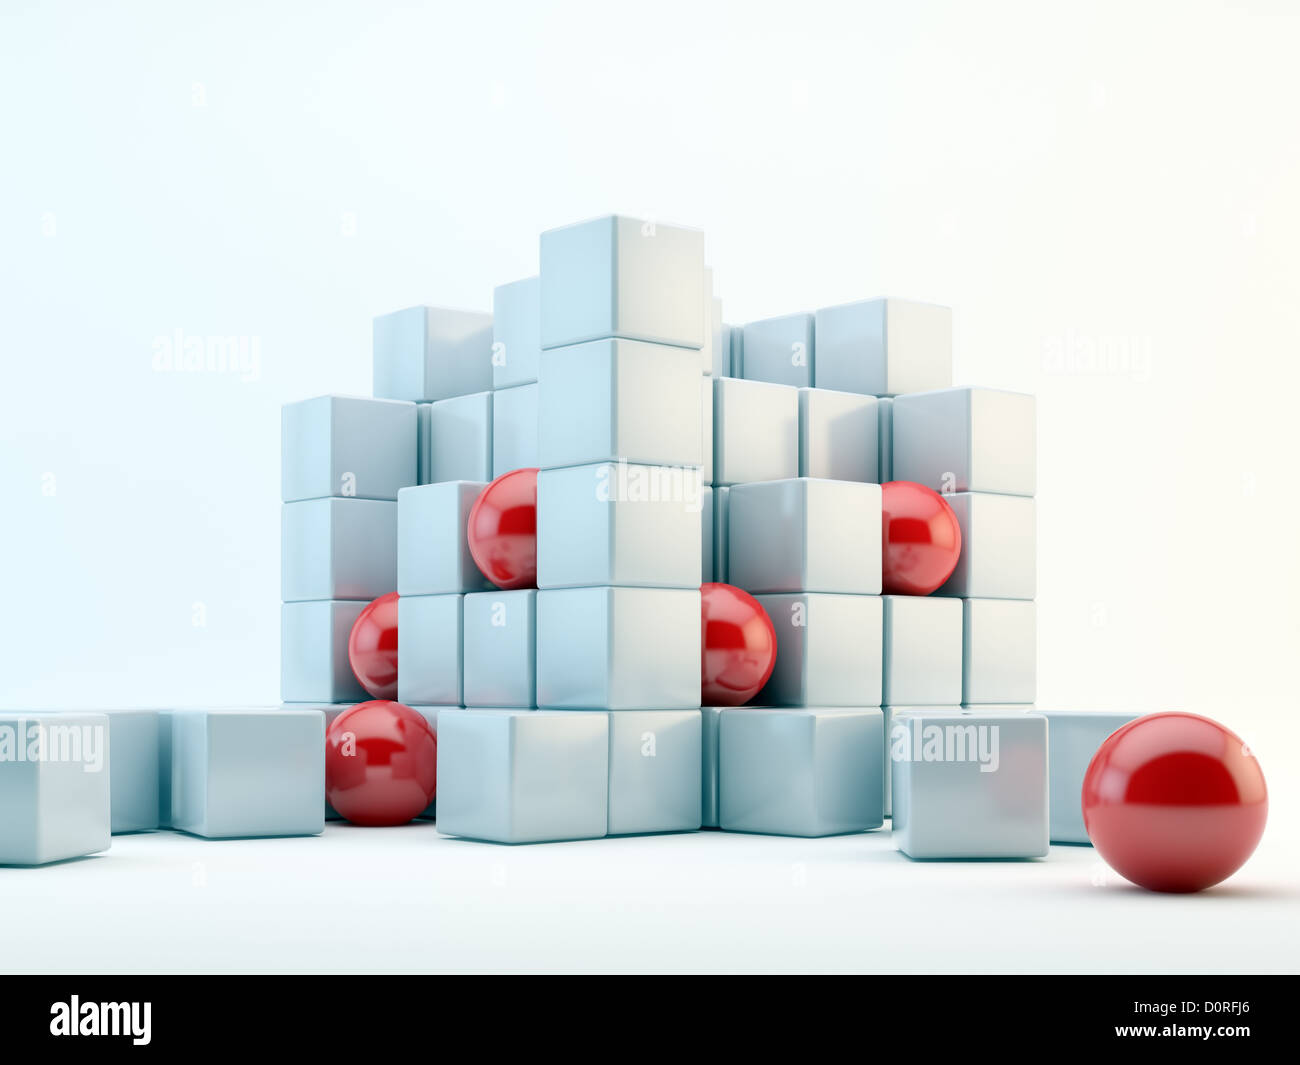 Spheres and cubes abstract Stock Photo